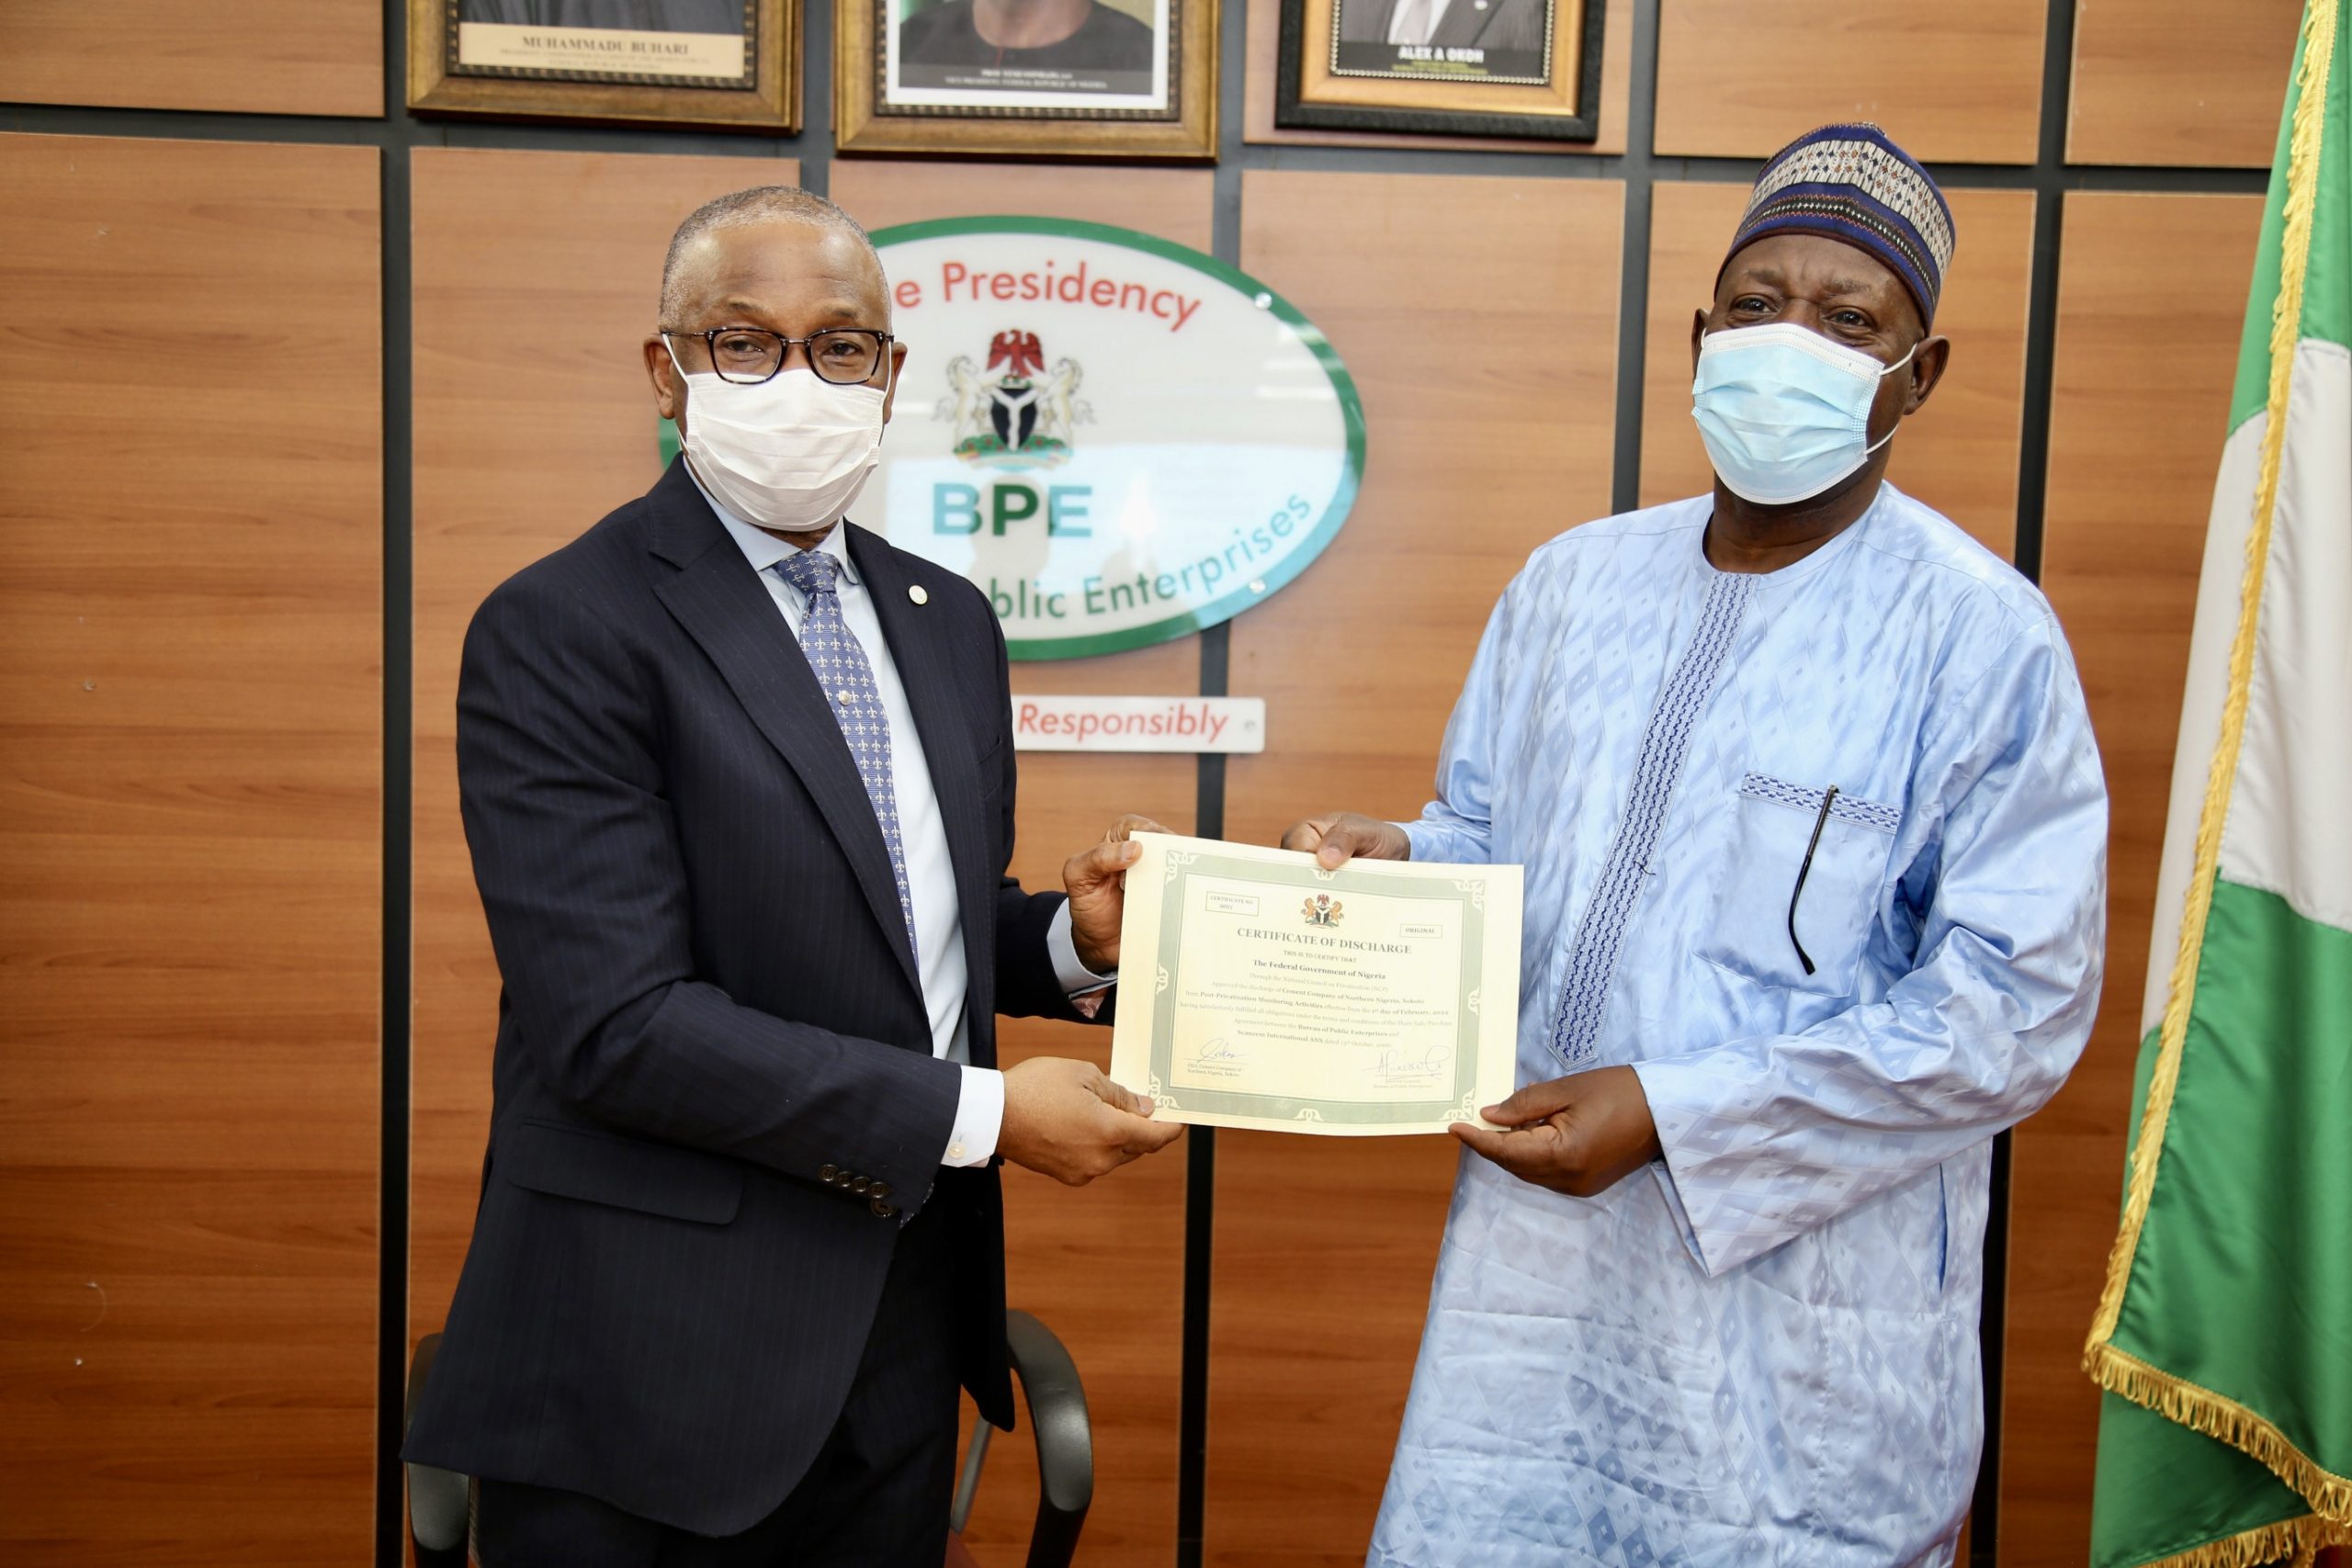 The Rep. of Cement Company of Northern Nigeria (CCNN) Sokoto, Mr. Sada Suleiman (r) displays the company’s discharge certificate after presentation by the Director General of the Bureau of Enterprises (BPE), Mr. Alex A. Okoh in Abuja.